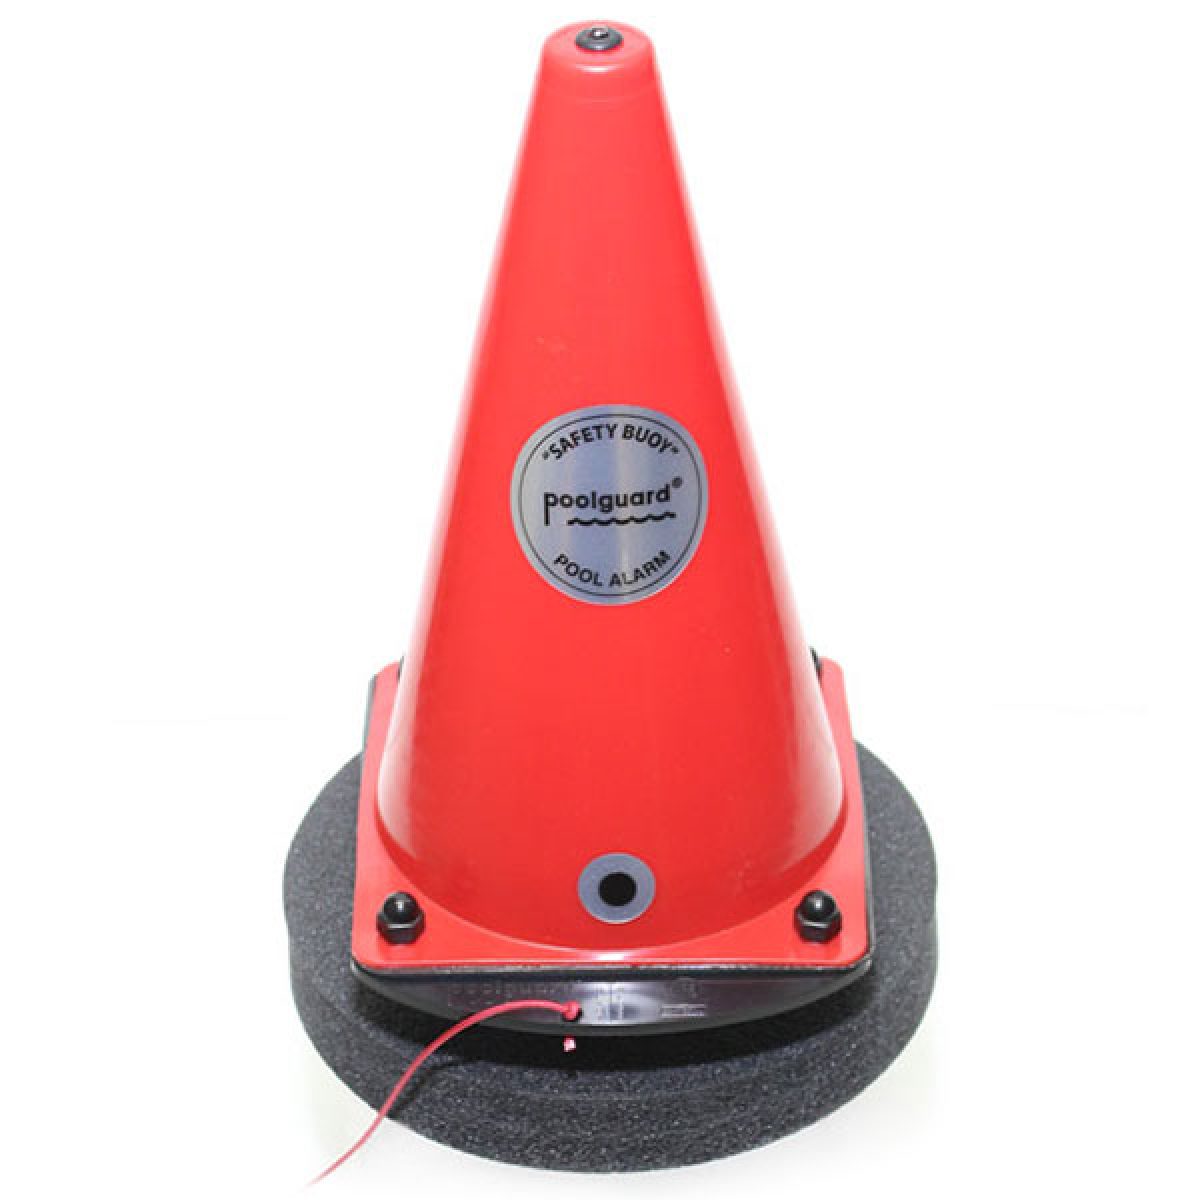 Poolguard® PGRM-SB Above Ground Swimming Pool Safety Buoy For Pool Alarm 